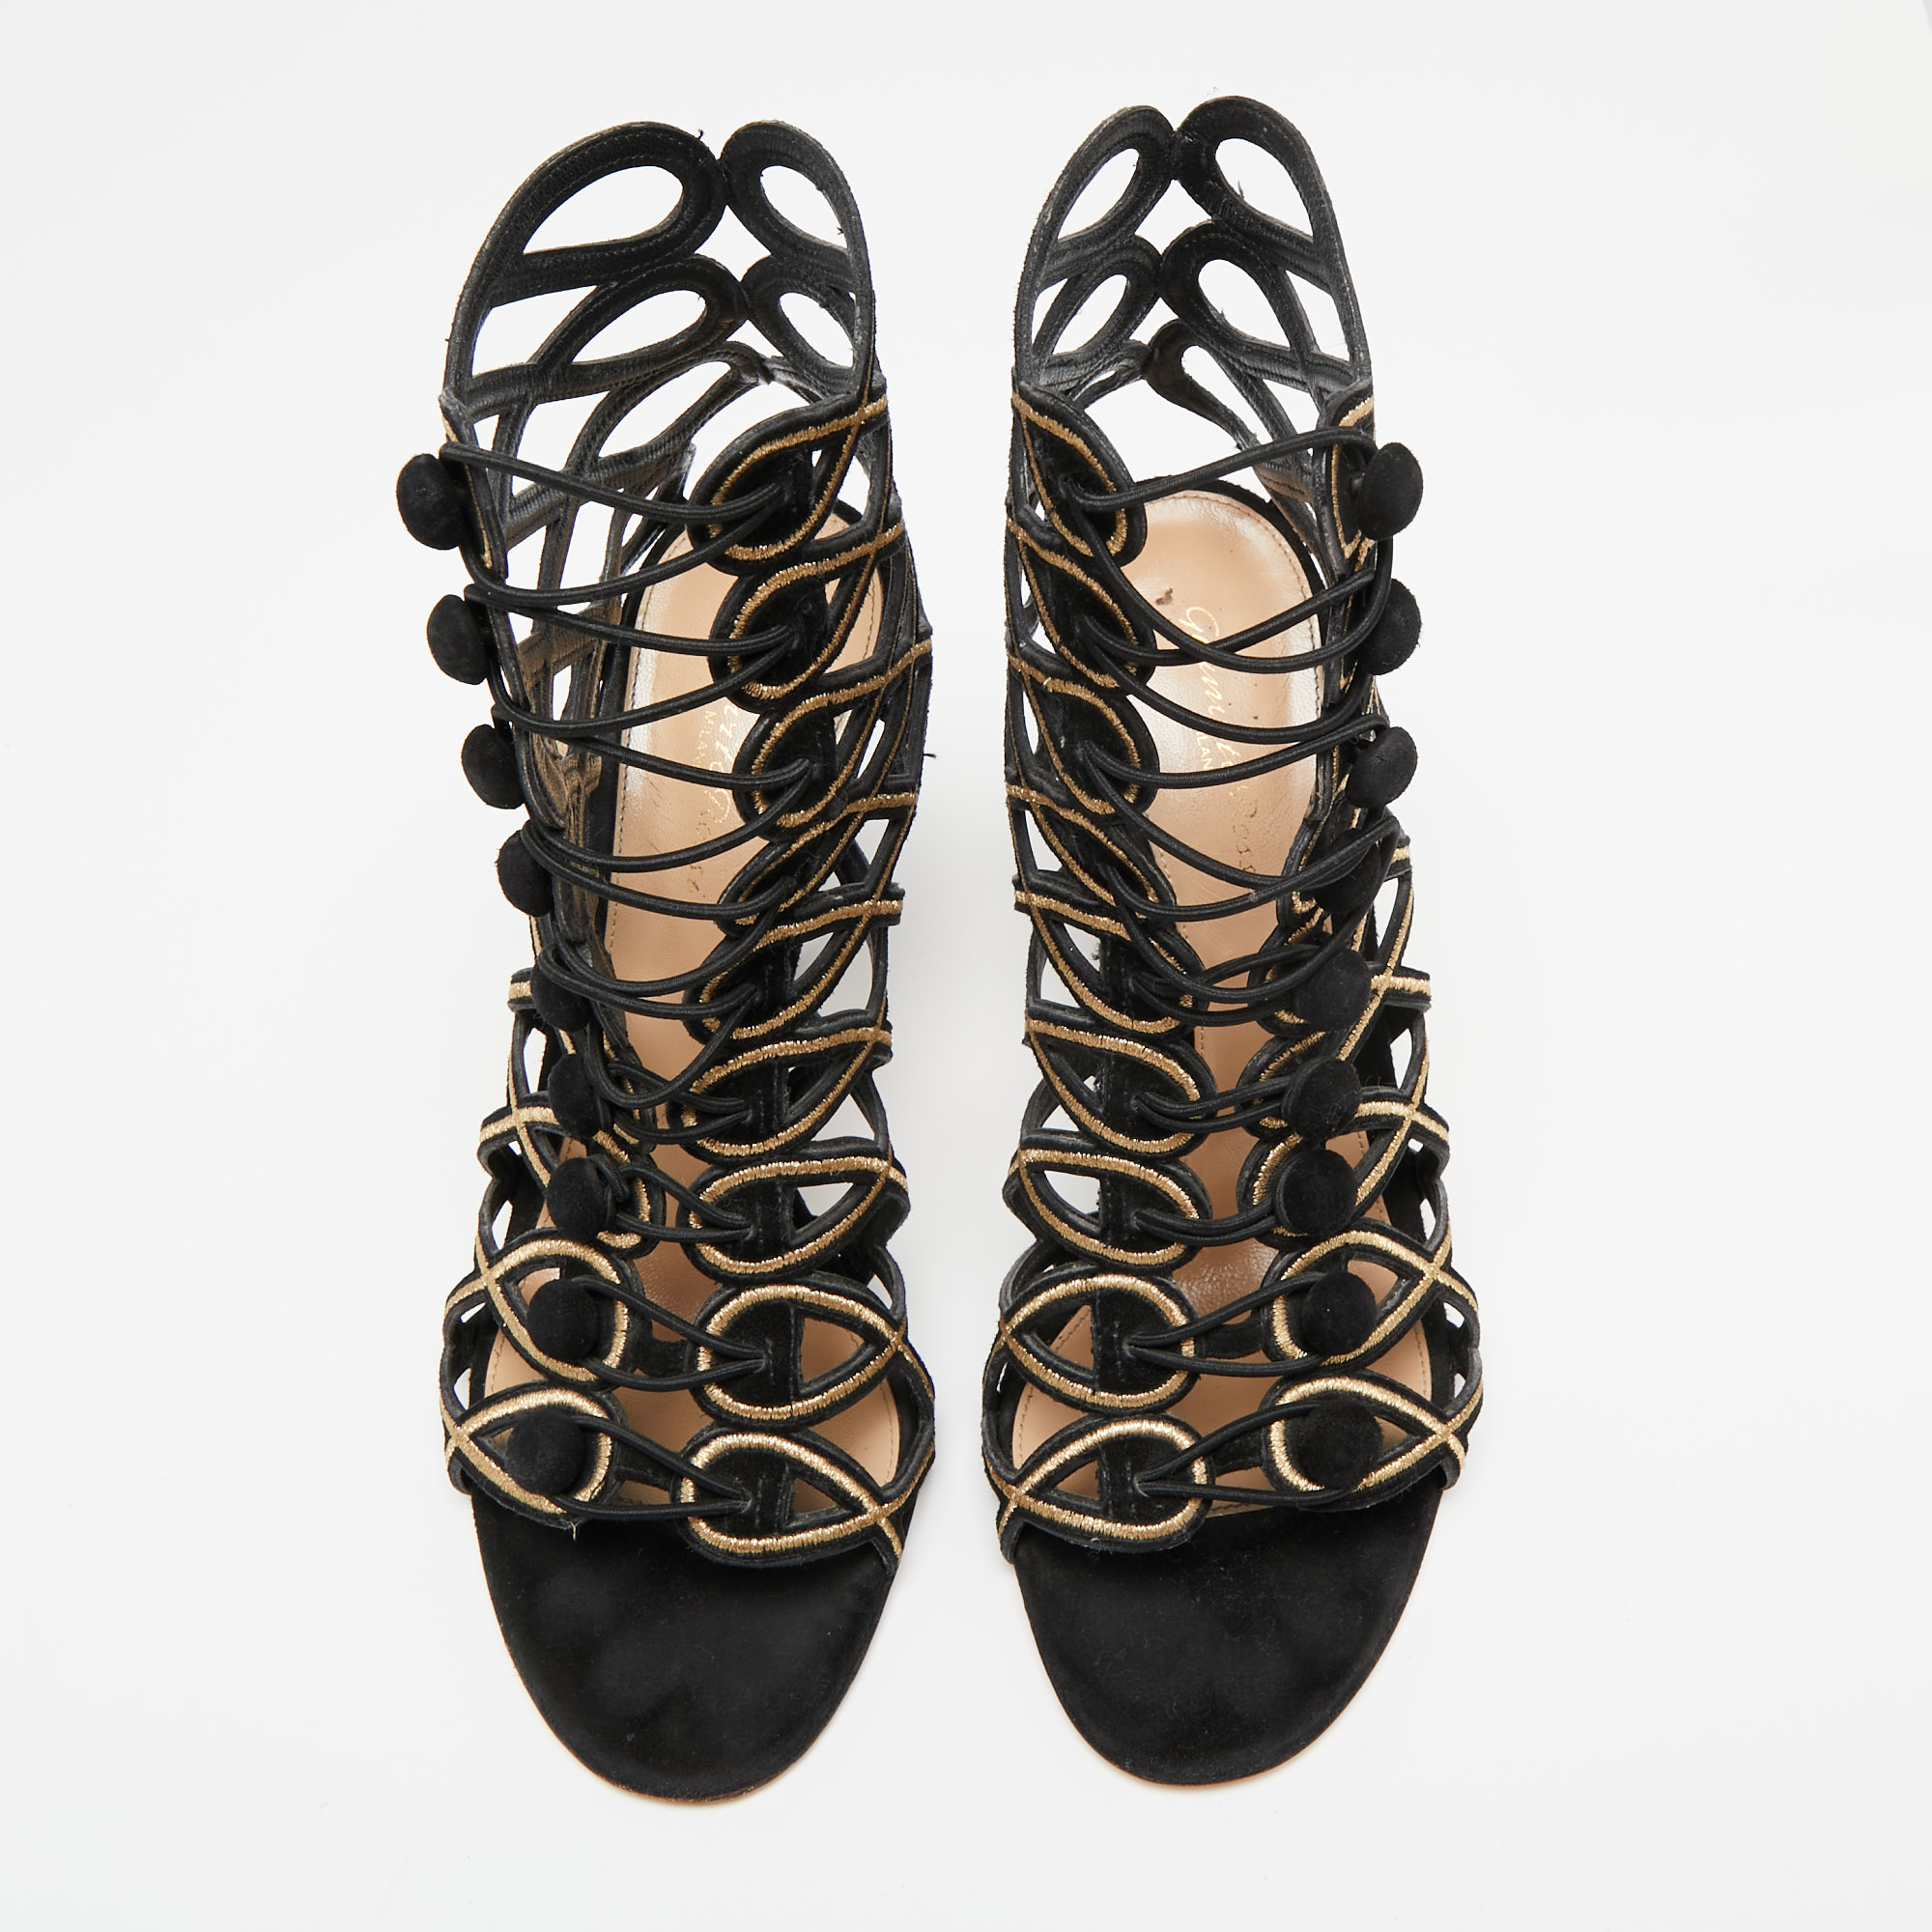 Gianvito Rossi Black/Gold Suede And Cutout Leather Lace Up Peep Toe Sandals Size 41